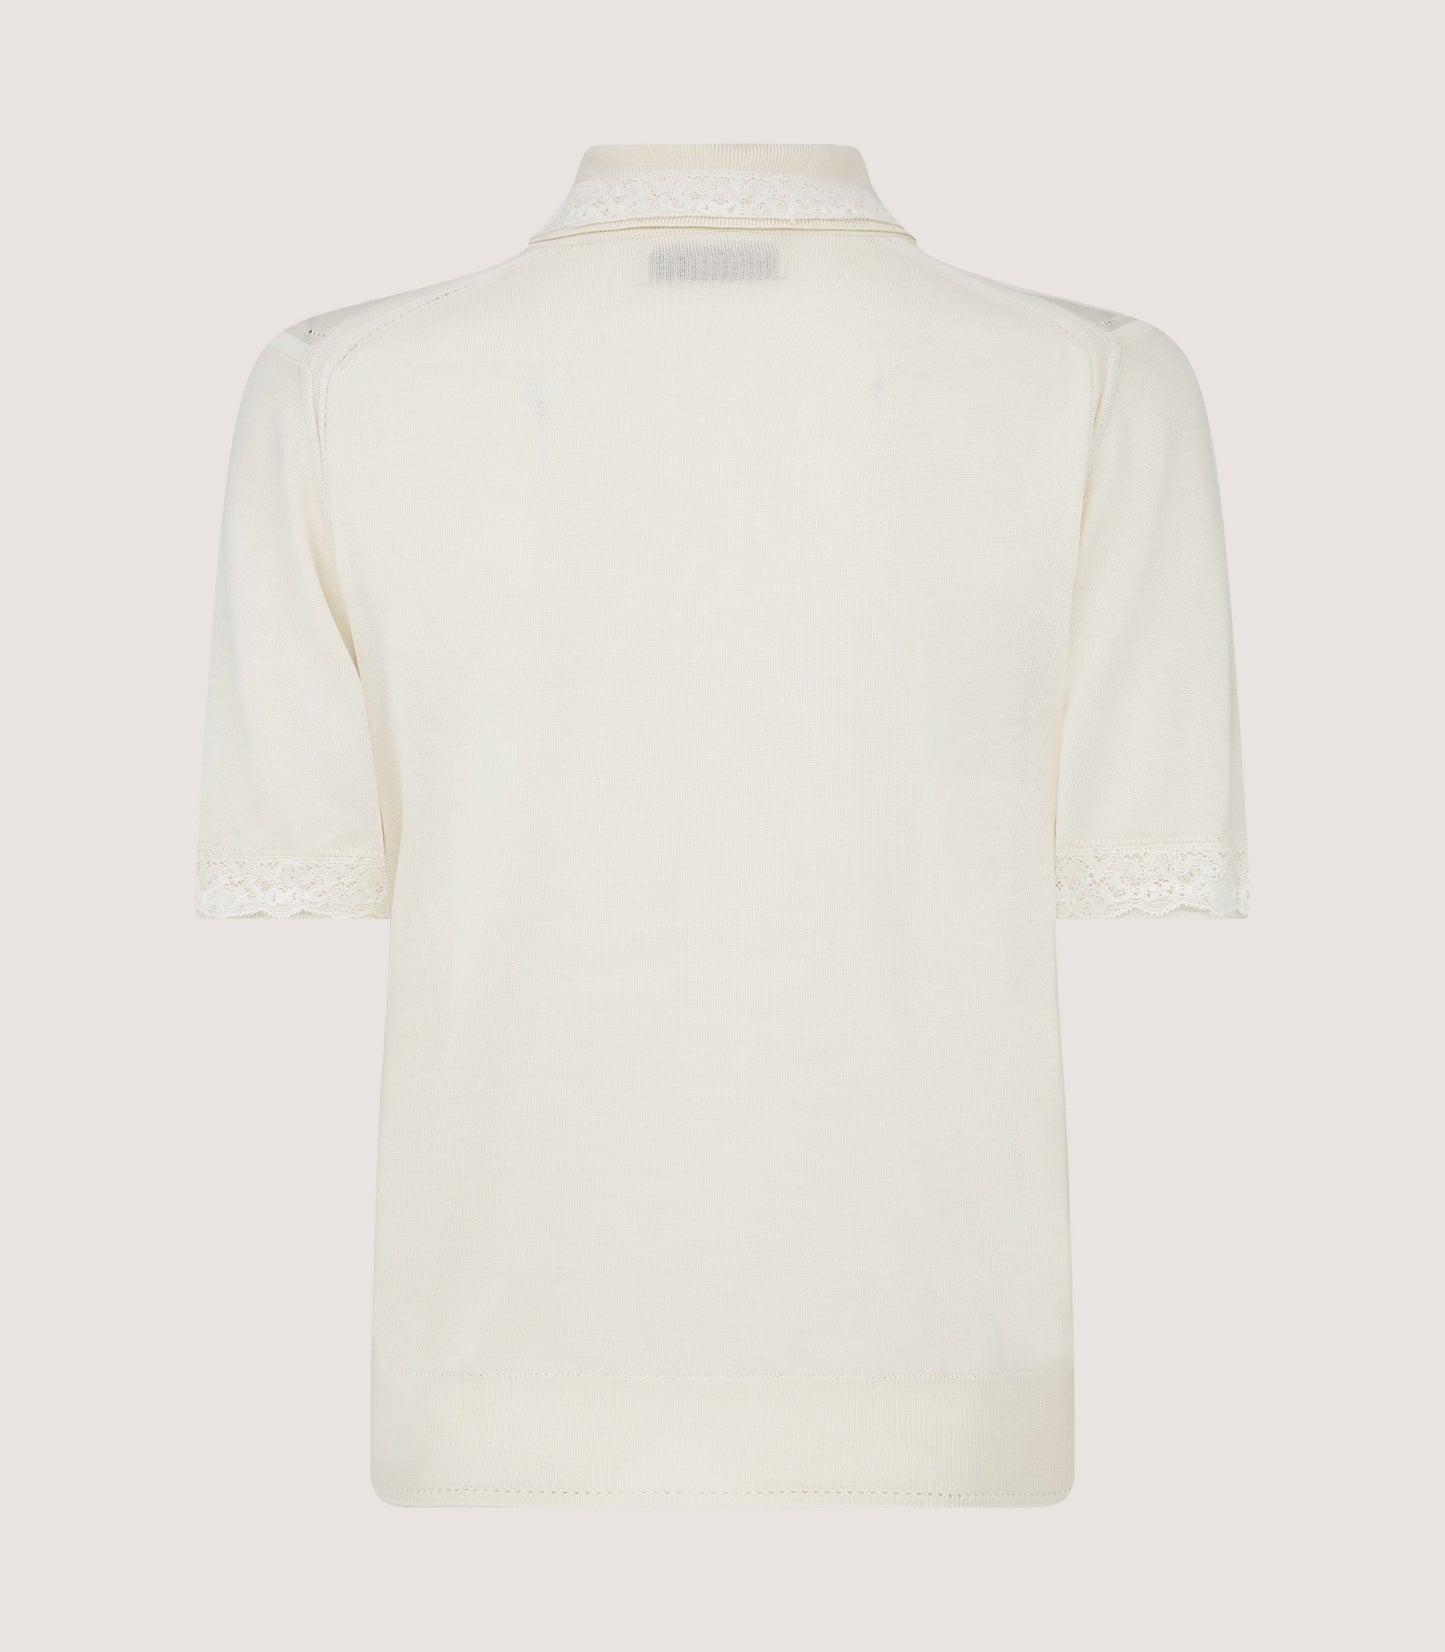 Women's Silk Jersey Polo Shirt with Lace Trim in Ivory